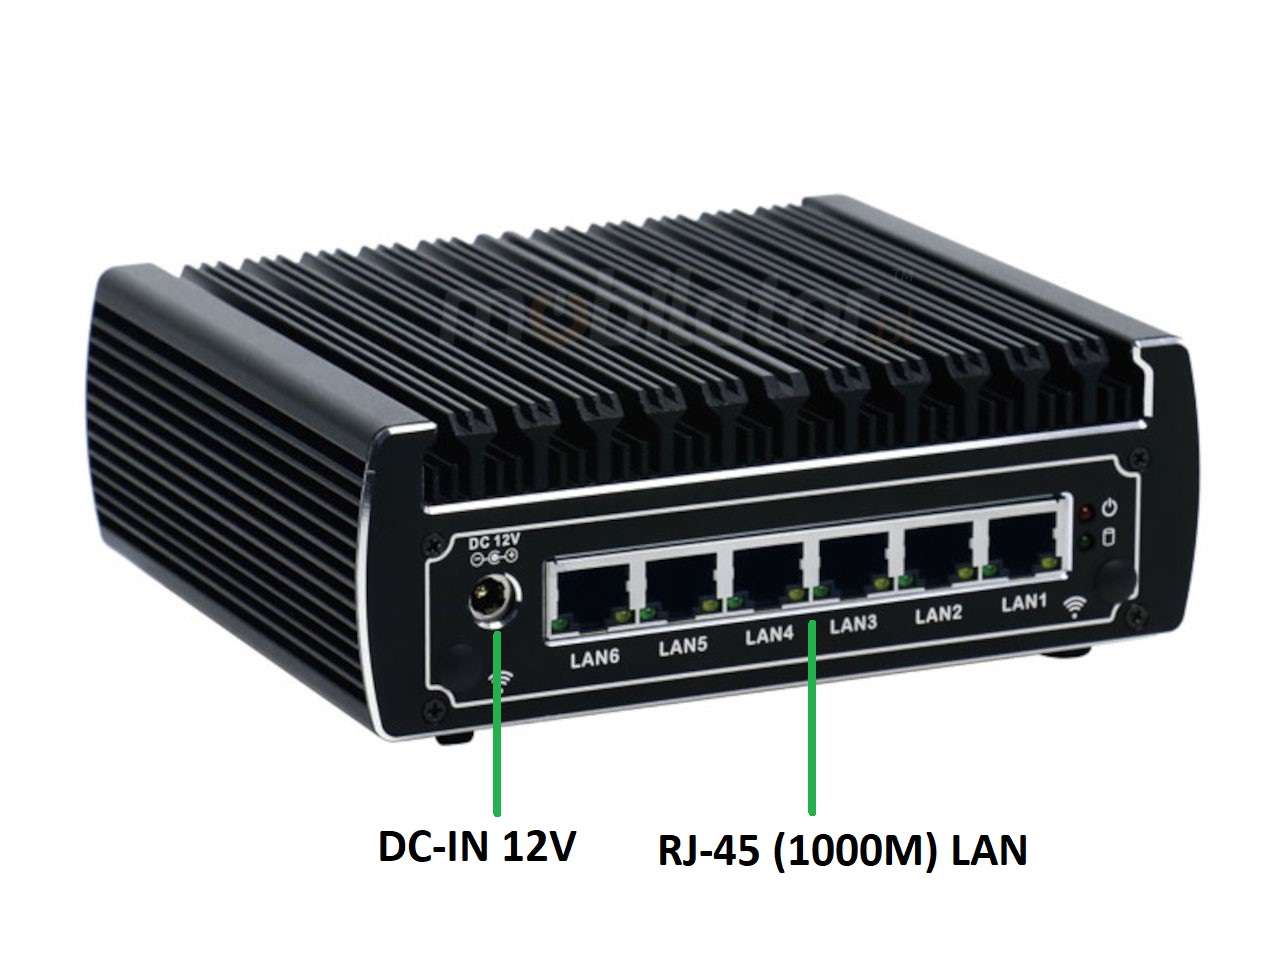  IBOX N133  v.13, back IO, industrial small fast reliable fanless industrial small LAN INTEL i3 HDD DDR4 